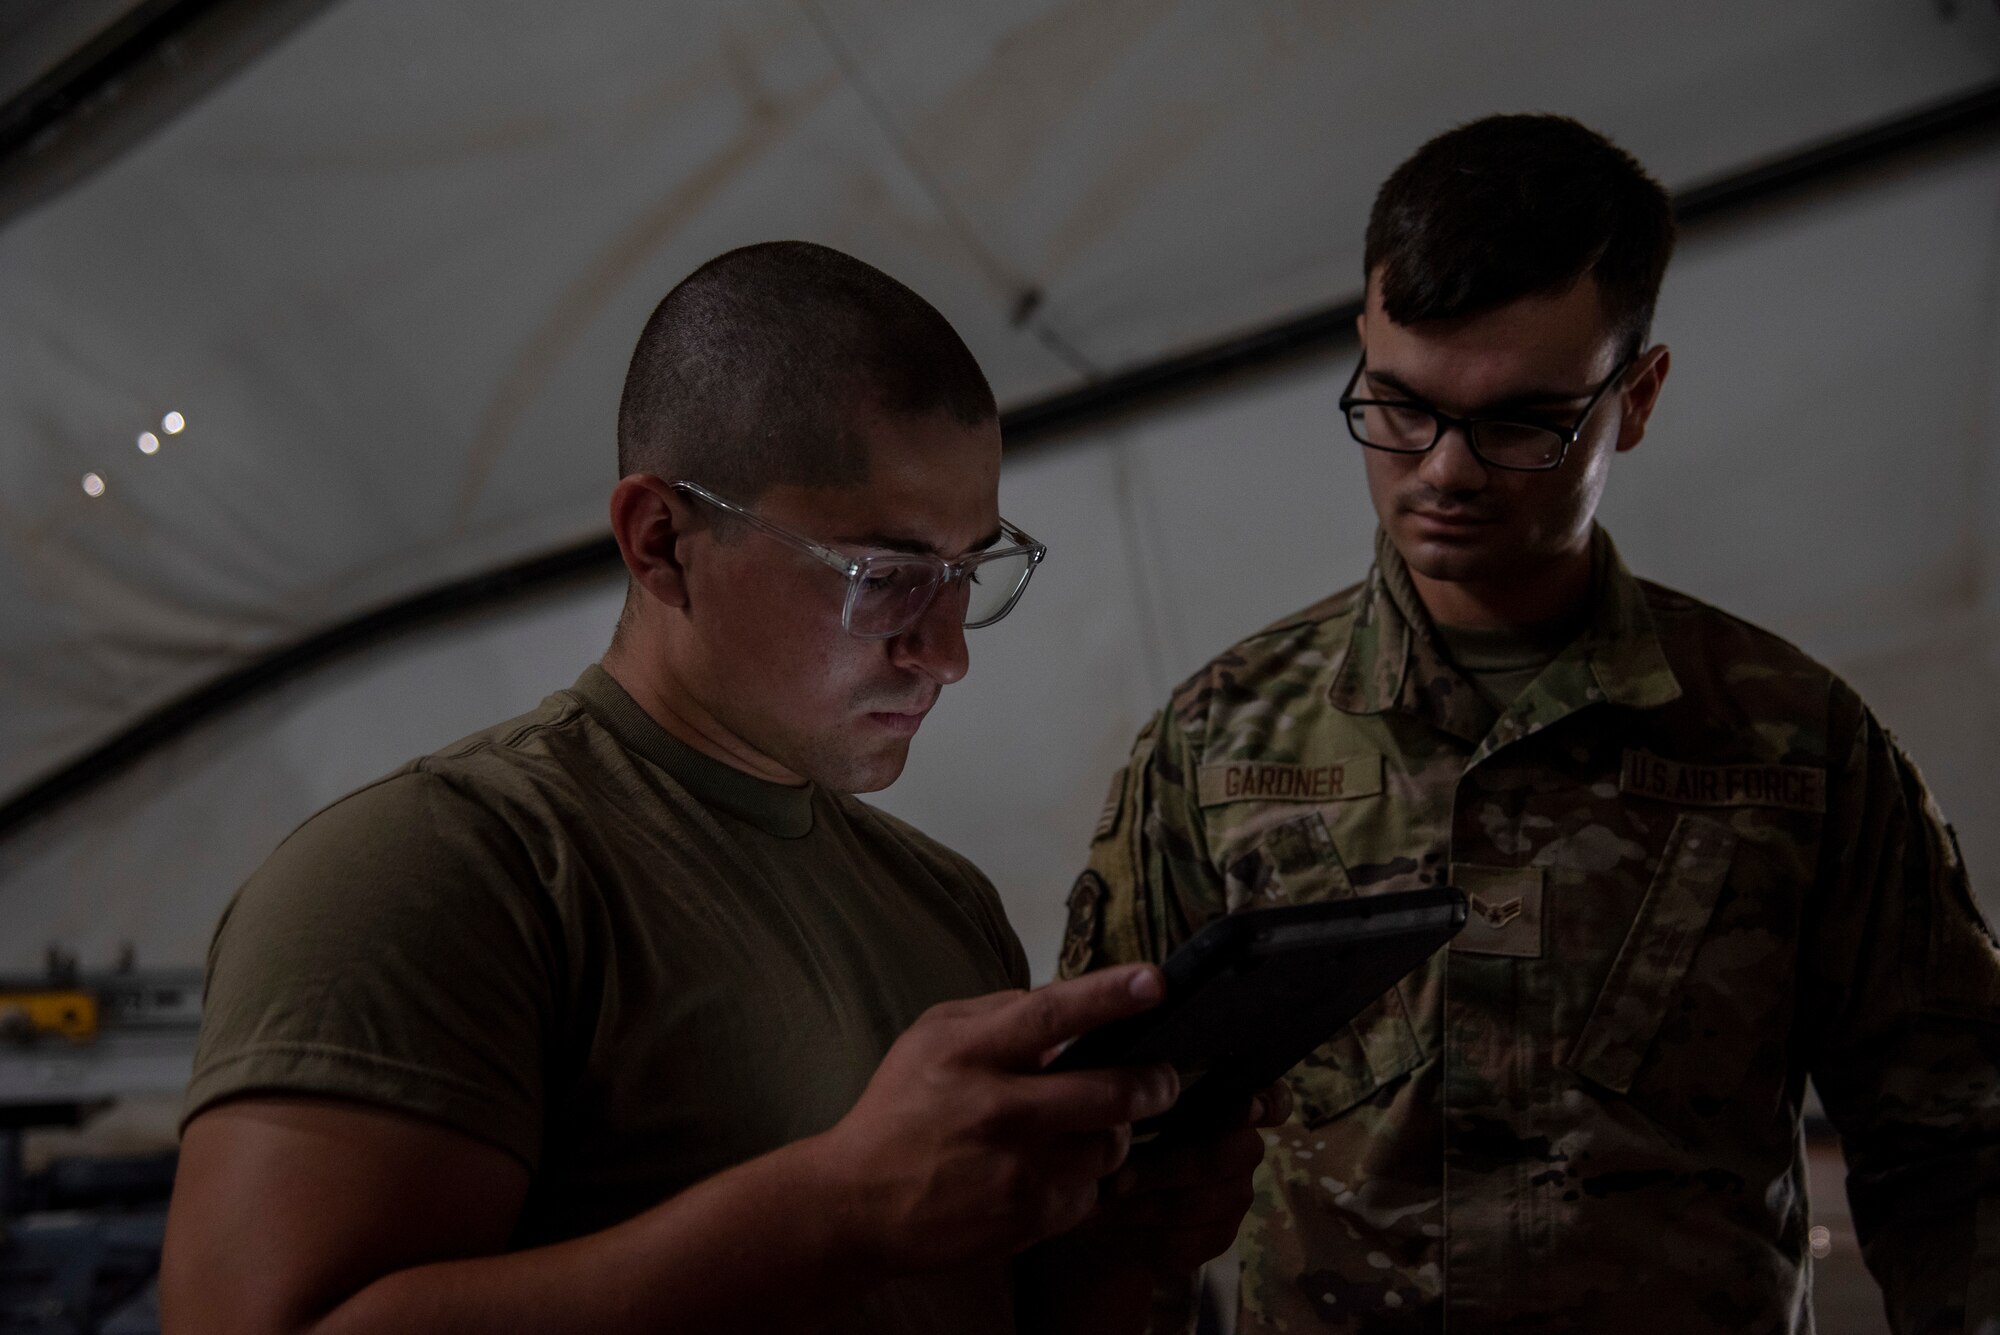 Airman 1st Class Gabriel Lara, 332d Expeditionary Fighter Squadron Maintenance specialist, shows a diagnostic tablet to Senior Airman Elijah Gardner, 332d Expeditionary Civil Engineer Programs specialist, as part of "Maintainer for a Day" at an undisclosed location, Southwest Asia, Nov. 25, 2022. "Maintainer for a Day" is a program that allows Airmen from diverse career fields to experience what it’s like to perform maintenance and repair work on an aircraft. (U.S. Air Force photo by: Tech. Sgt. Jim Bentley)